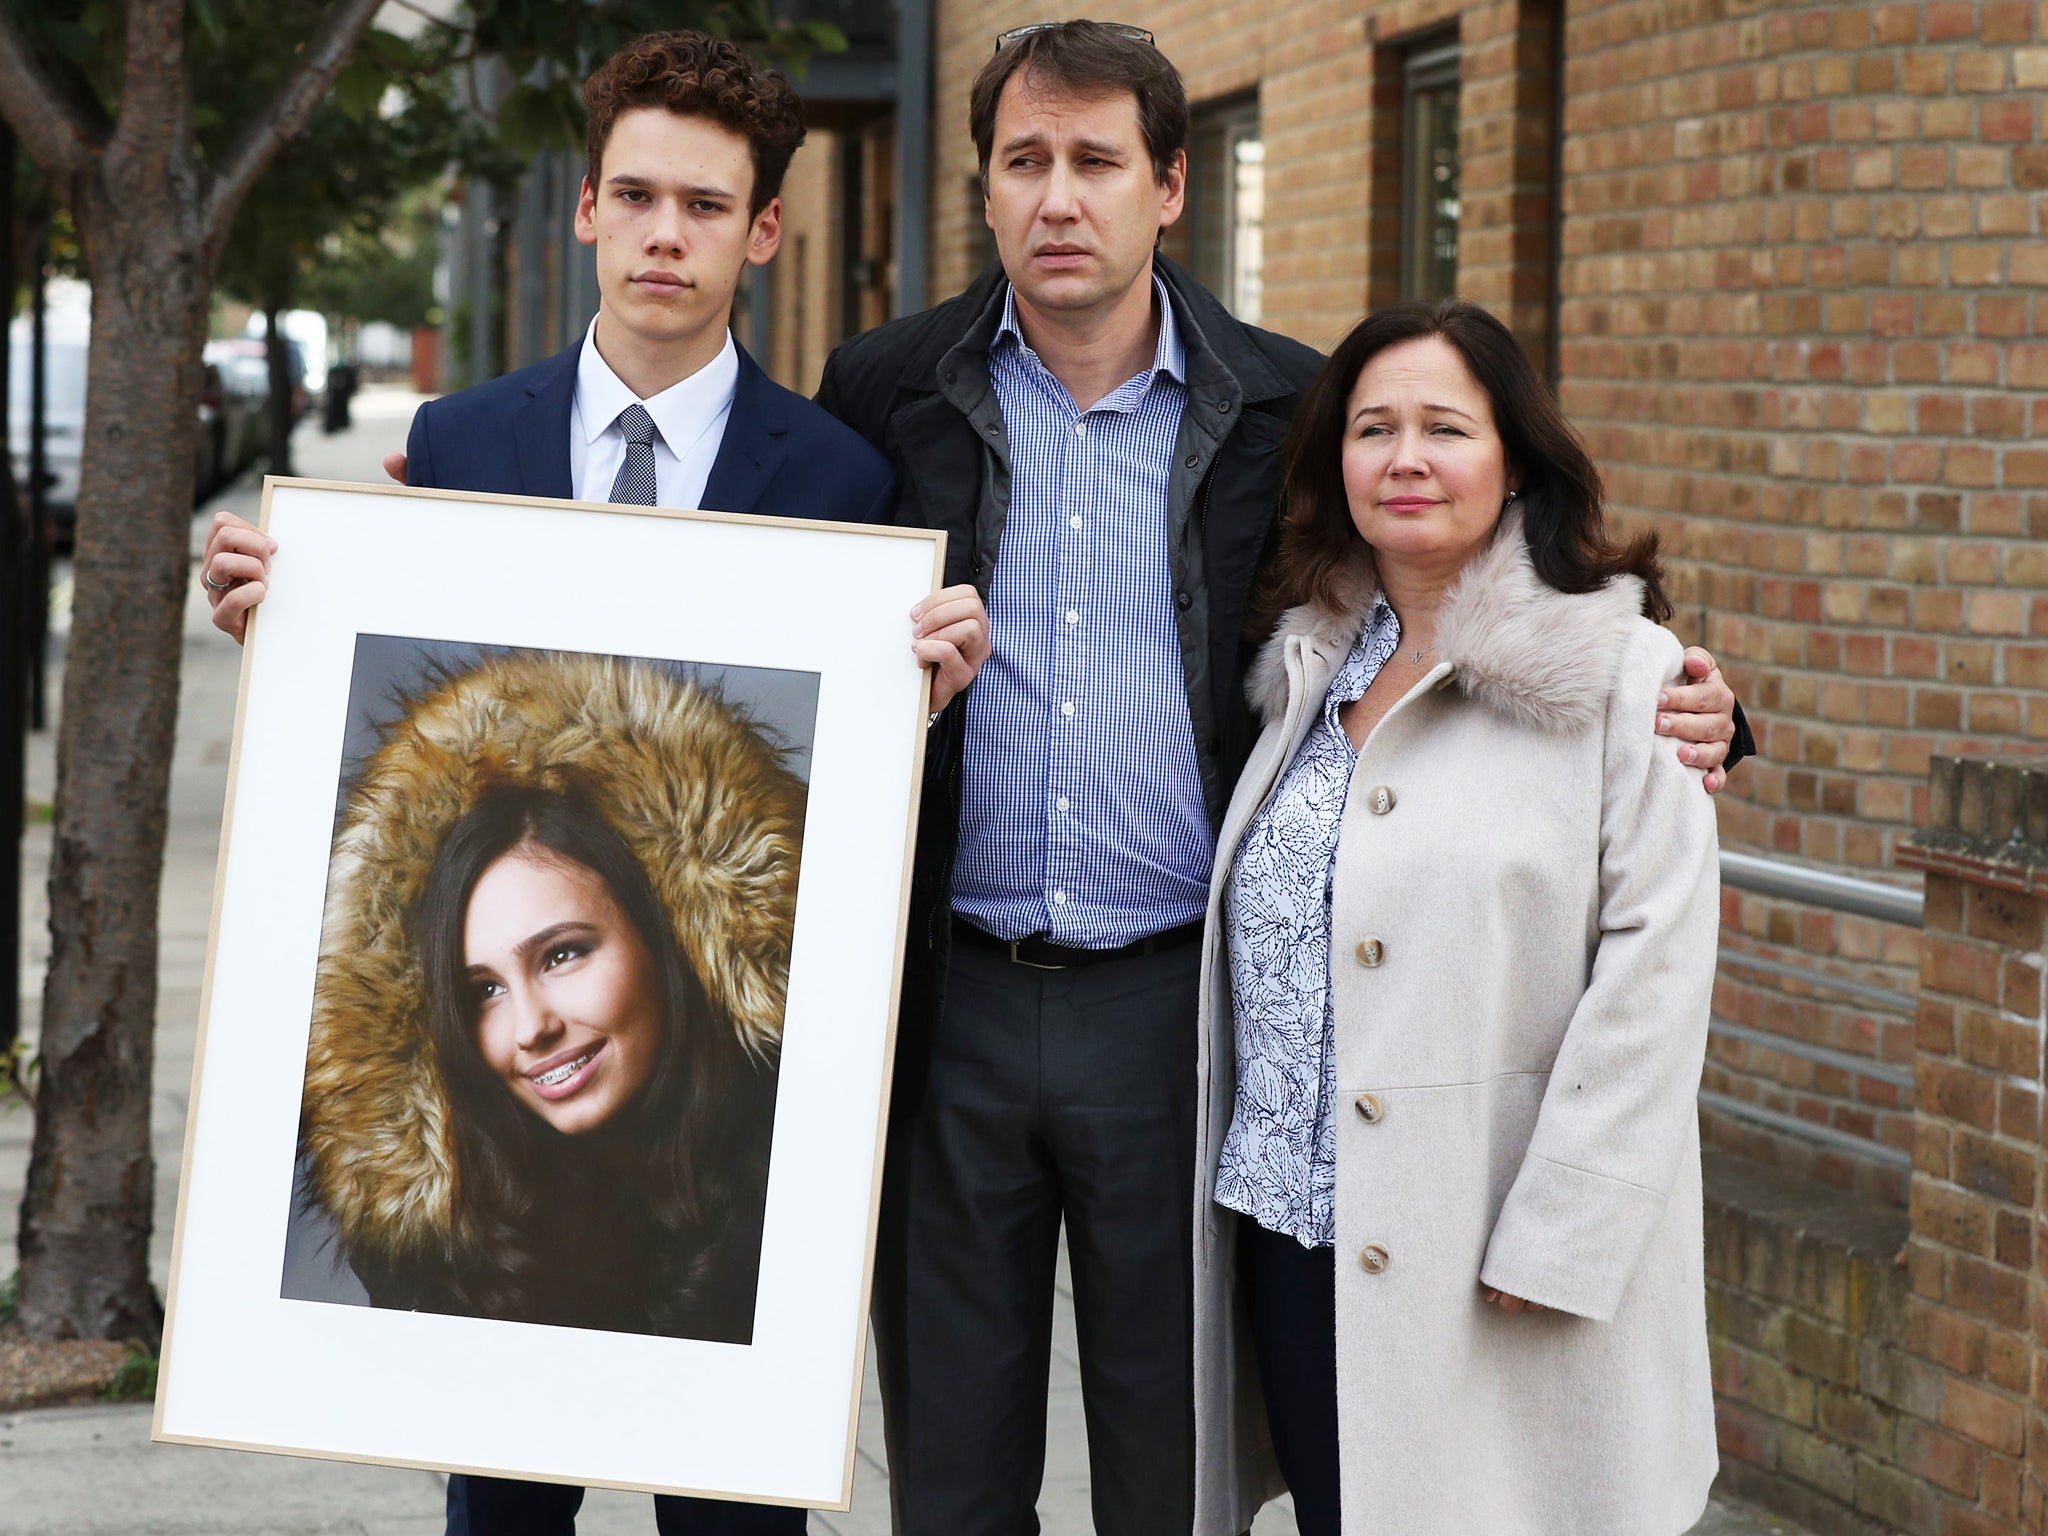 Nadim and Tanya Ednan-Laperouse, with their son Alex holding a portrait of Natasha, in 2018